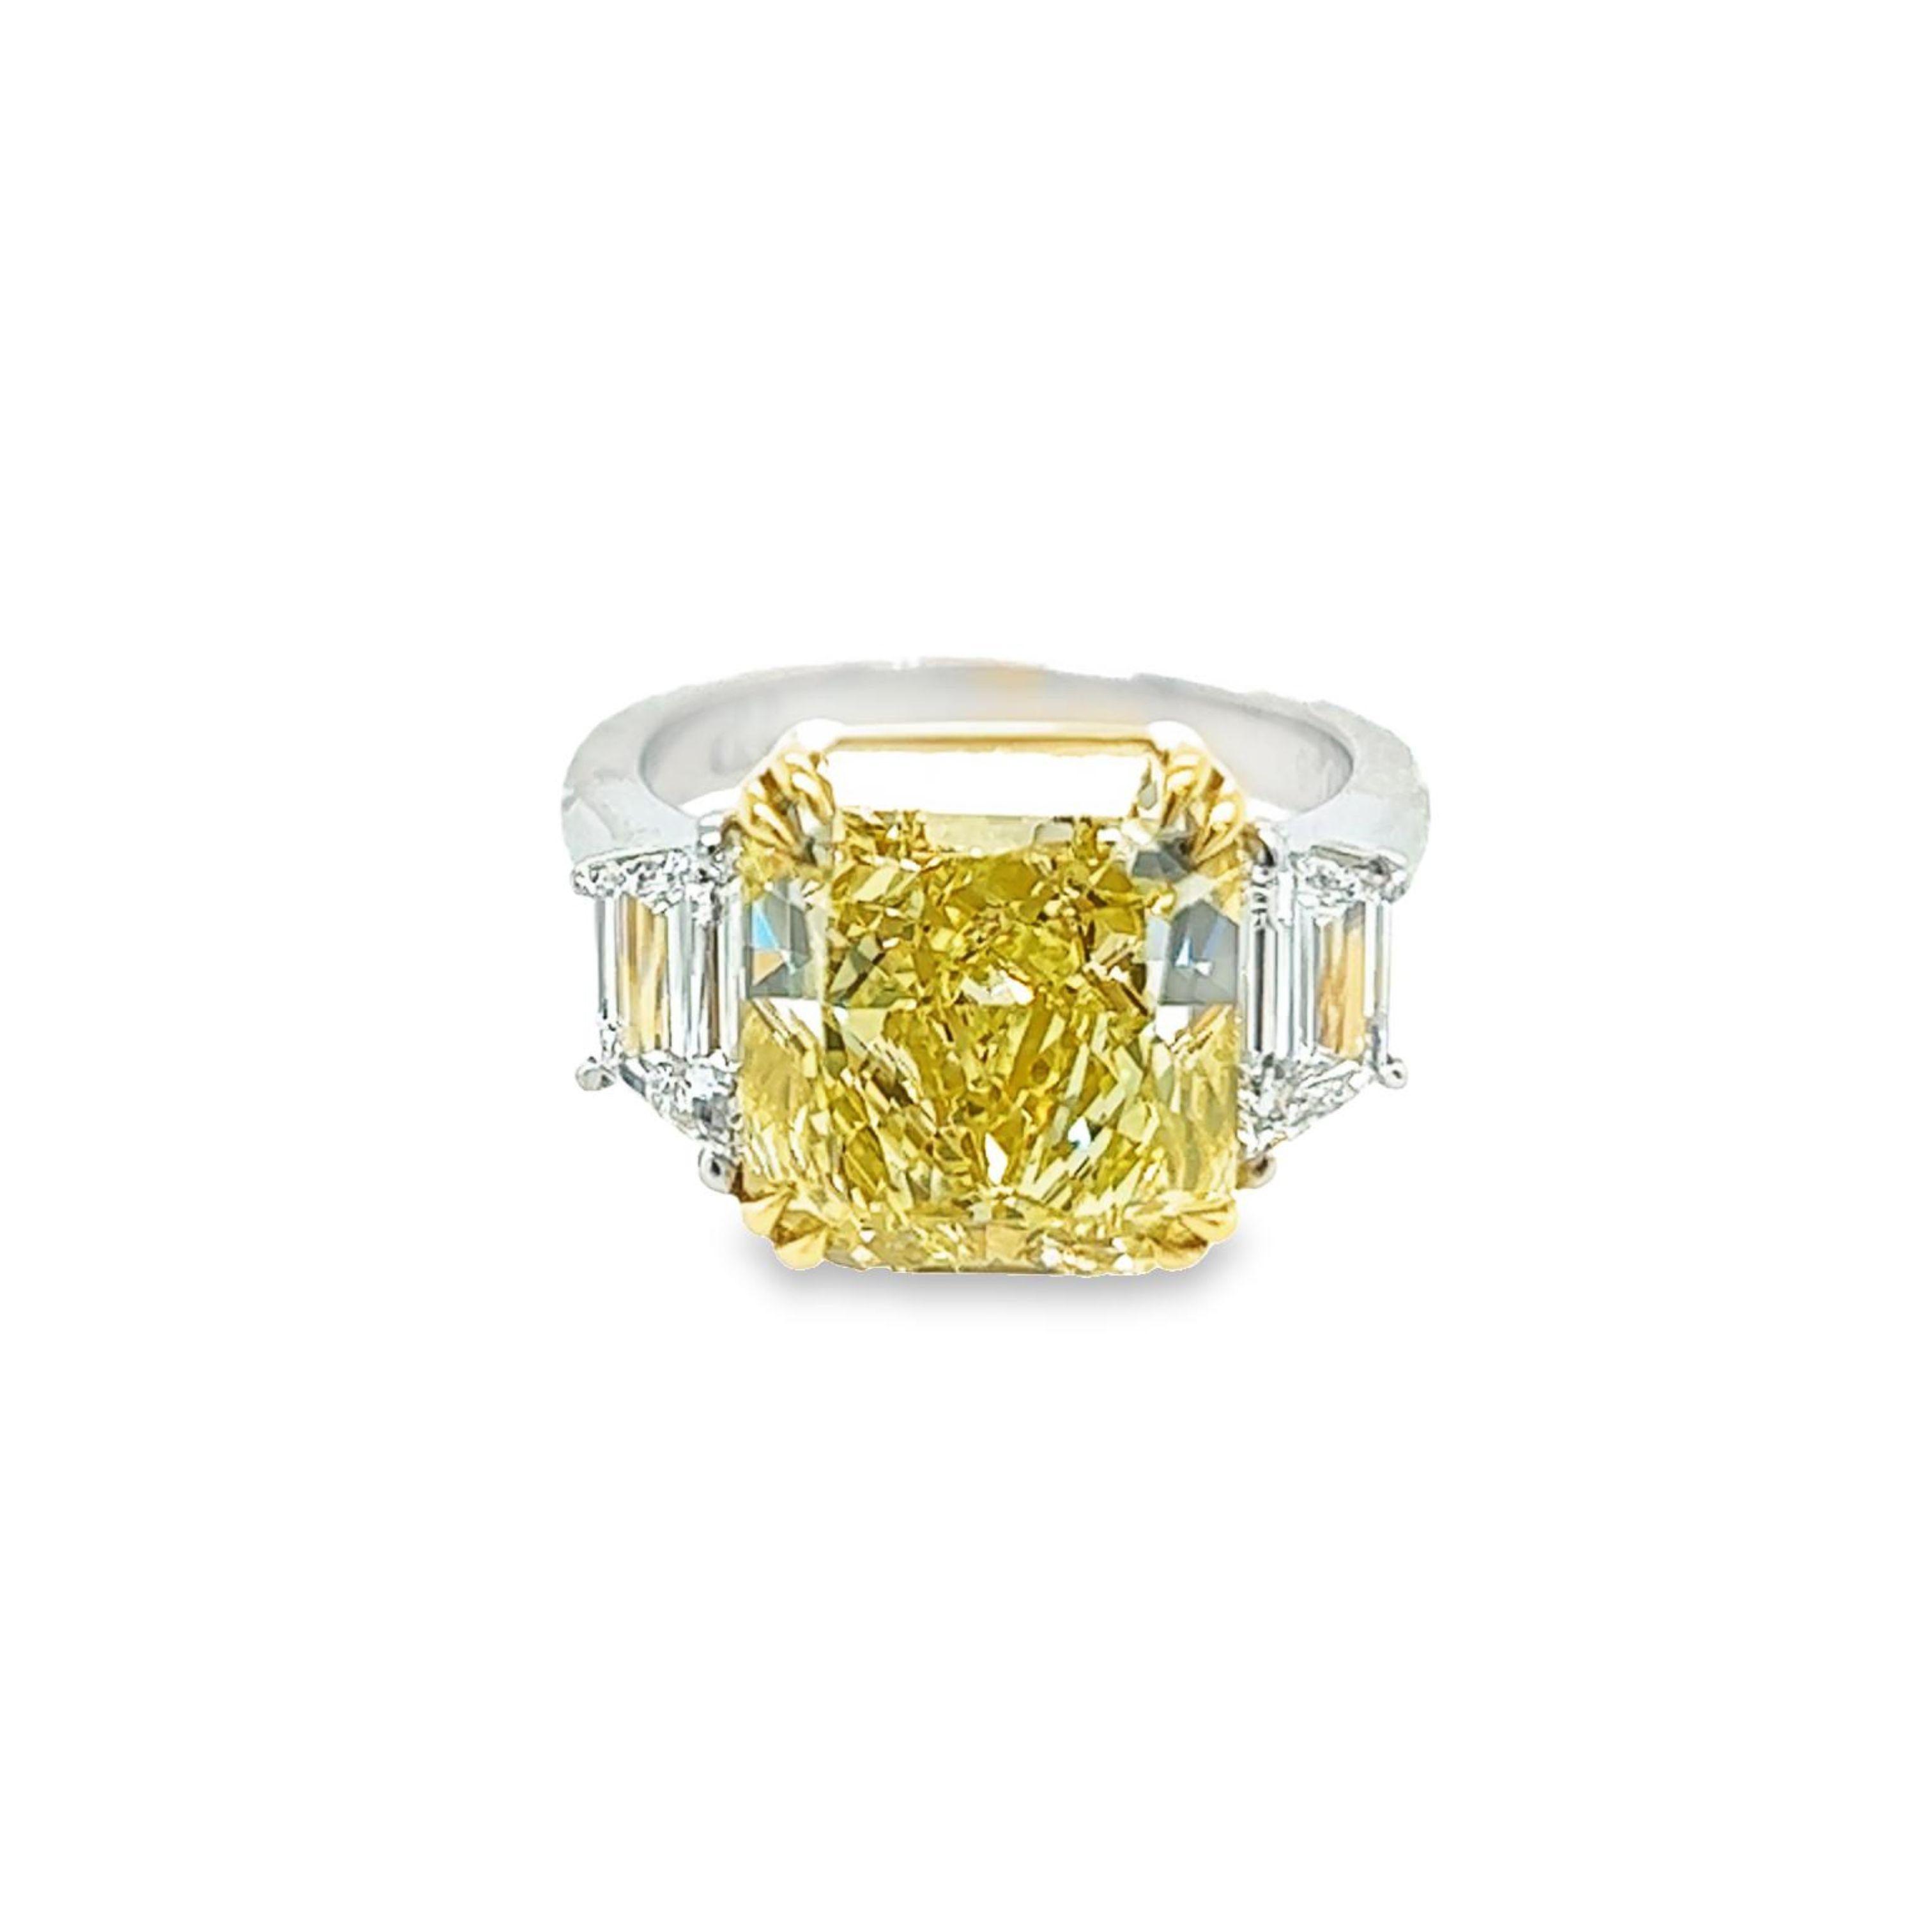 Rosenberg Diamonds & Co. 7.81 carat Radiant Cut Fancy Yellow VVS2 clarity is accompanied by a GIA certificate. This beautiful bright radiant cut is set in a handmade platinum & 18k yellow gold setting with perfectly matched pair of trapezoid side